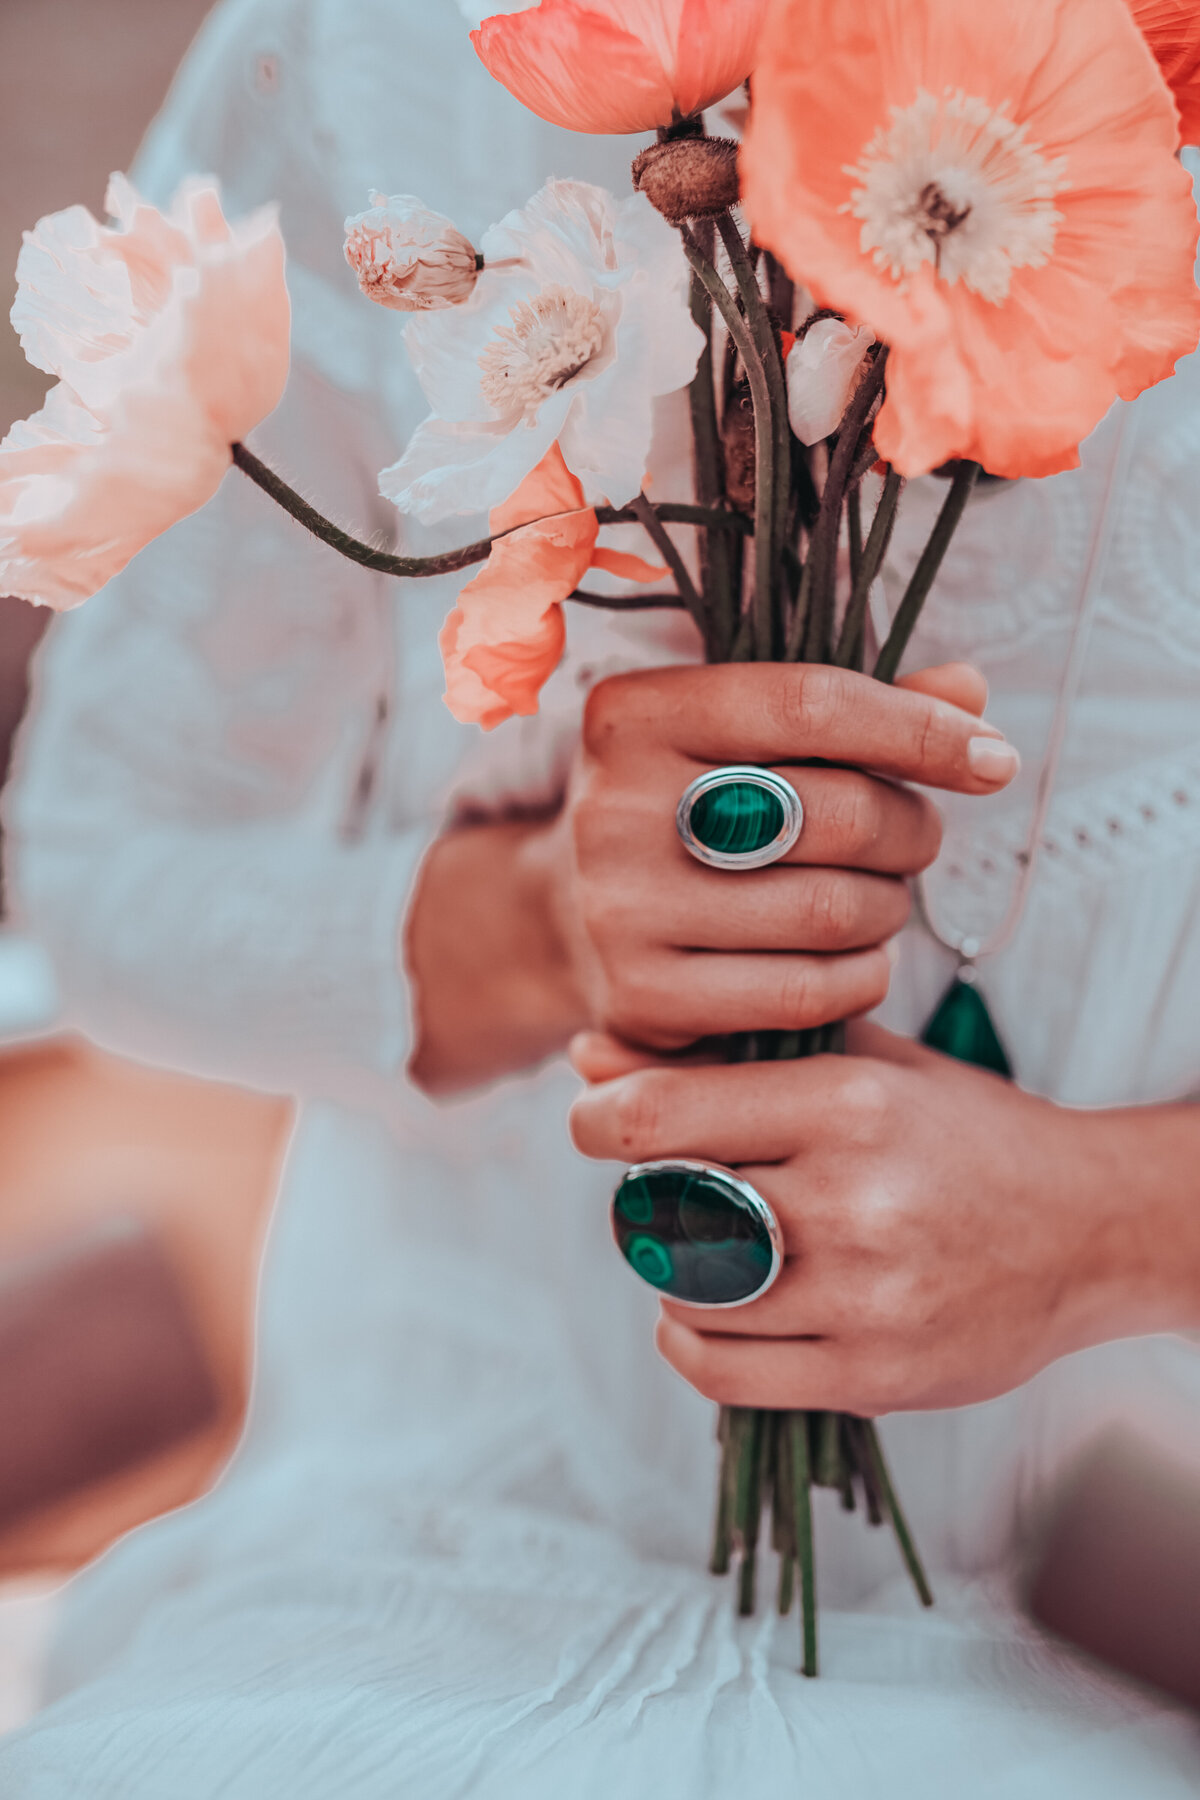 Green emerald accessories in hands surrounded by blooms